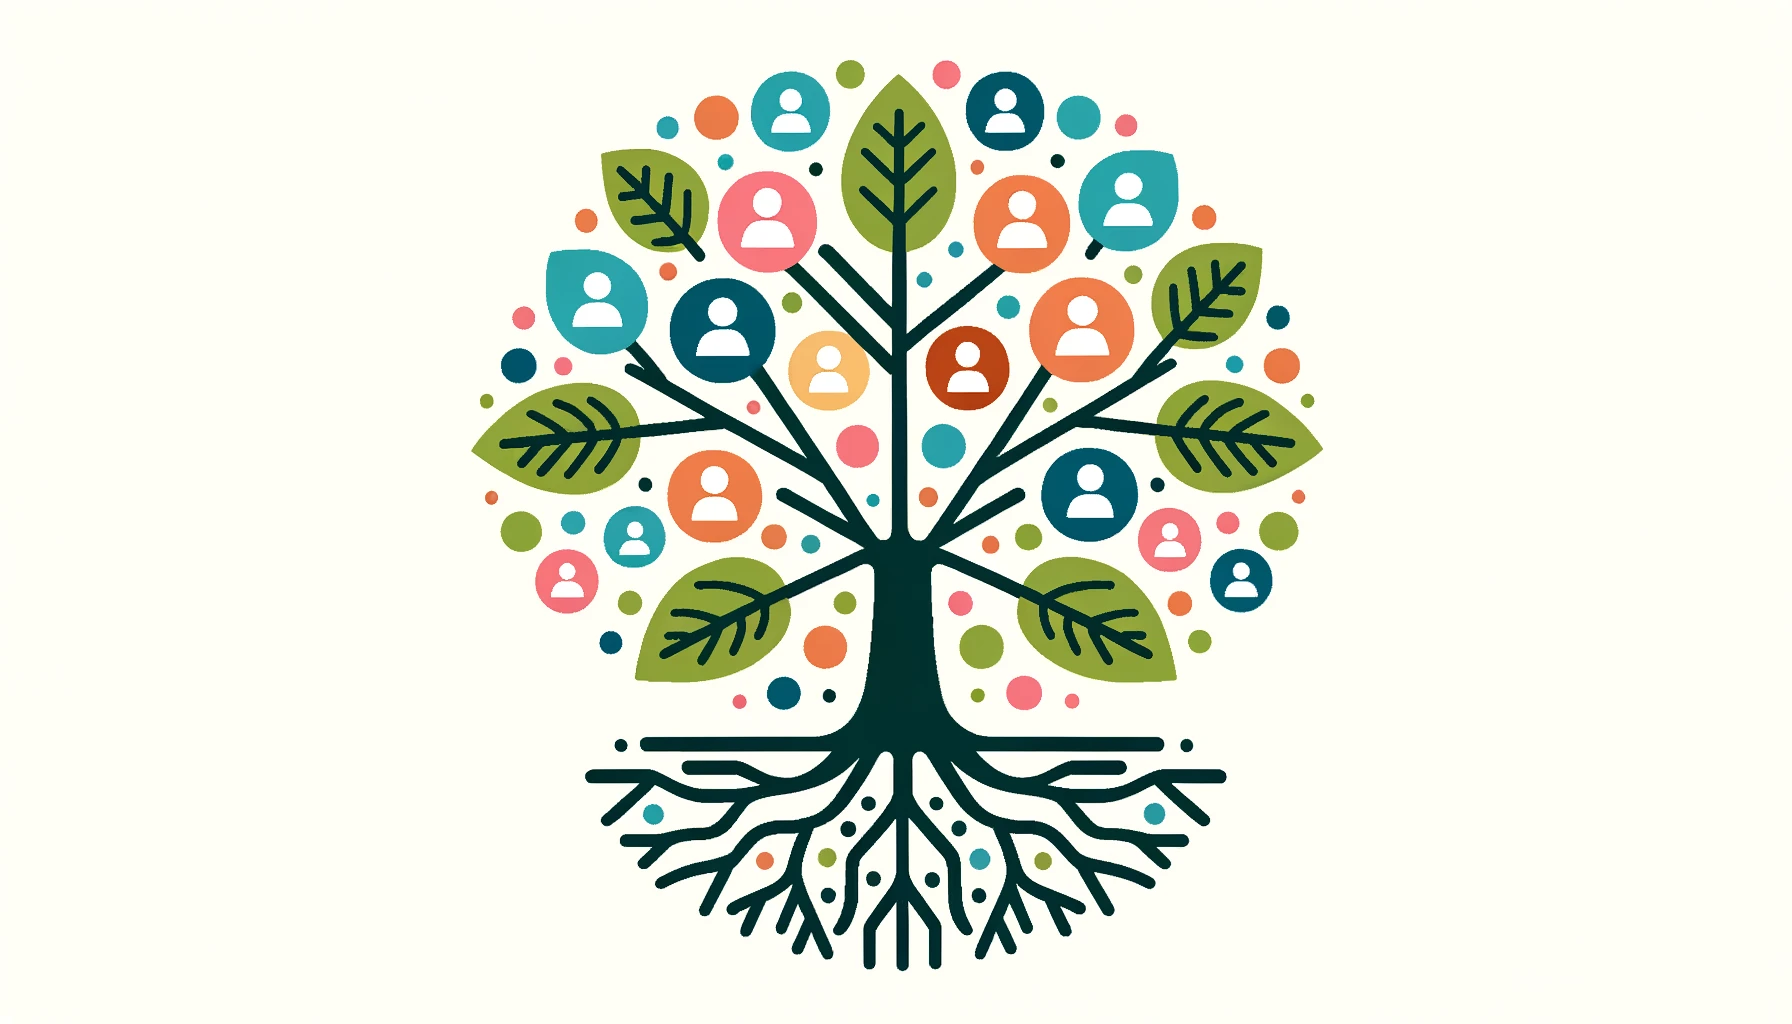 Vector graphic of a tree with diverse leaders as its leaves. The roots, trunk, and branches represent the strong foundation and interconnectedness of the leadership, while the leaves symbolize the collective decision-making and shared responsibilities.